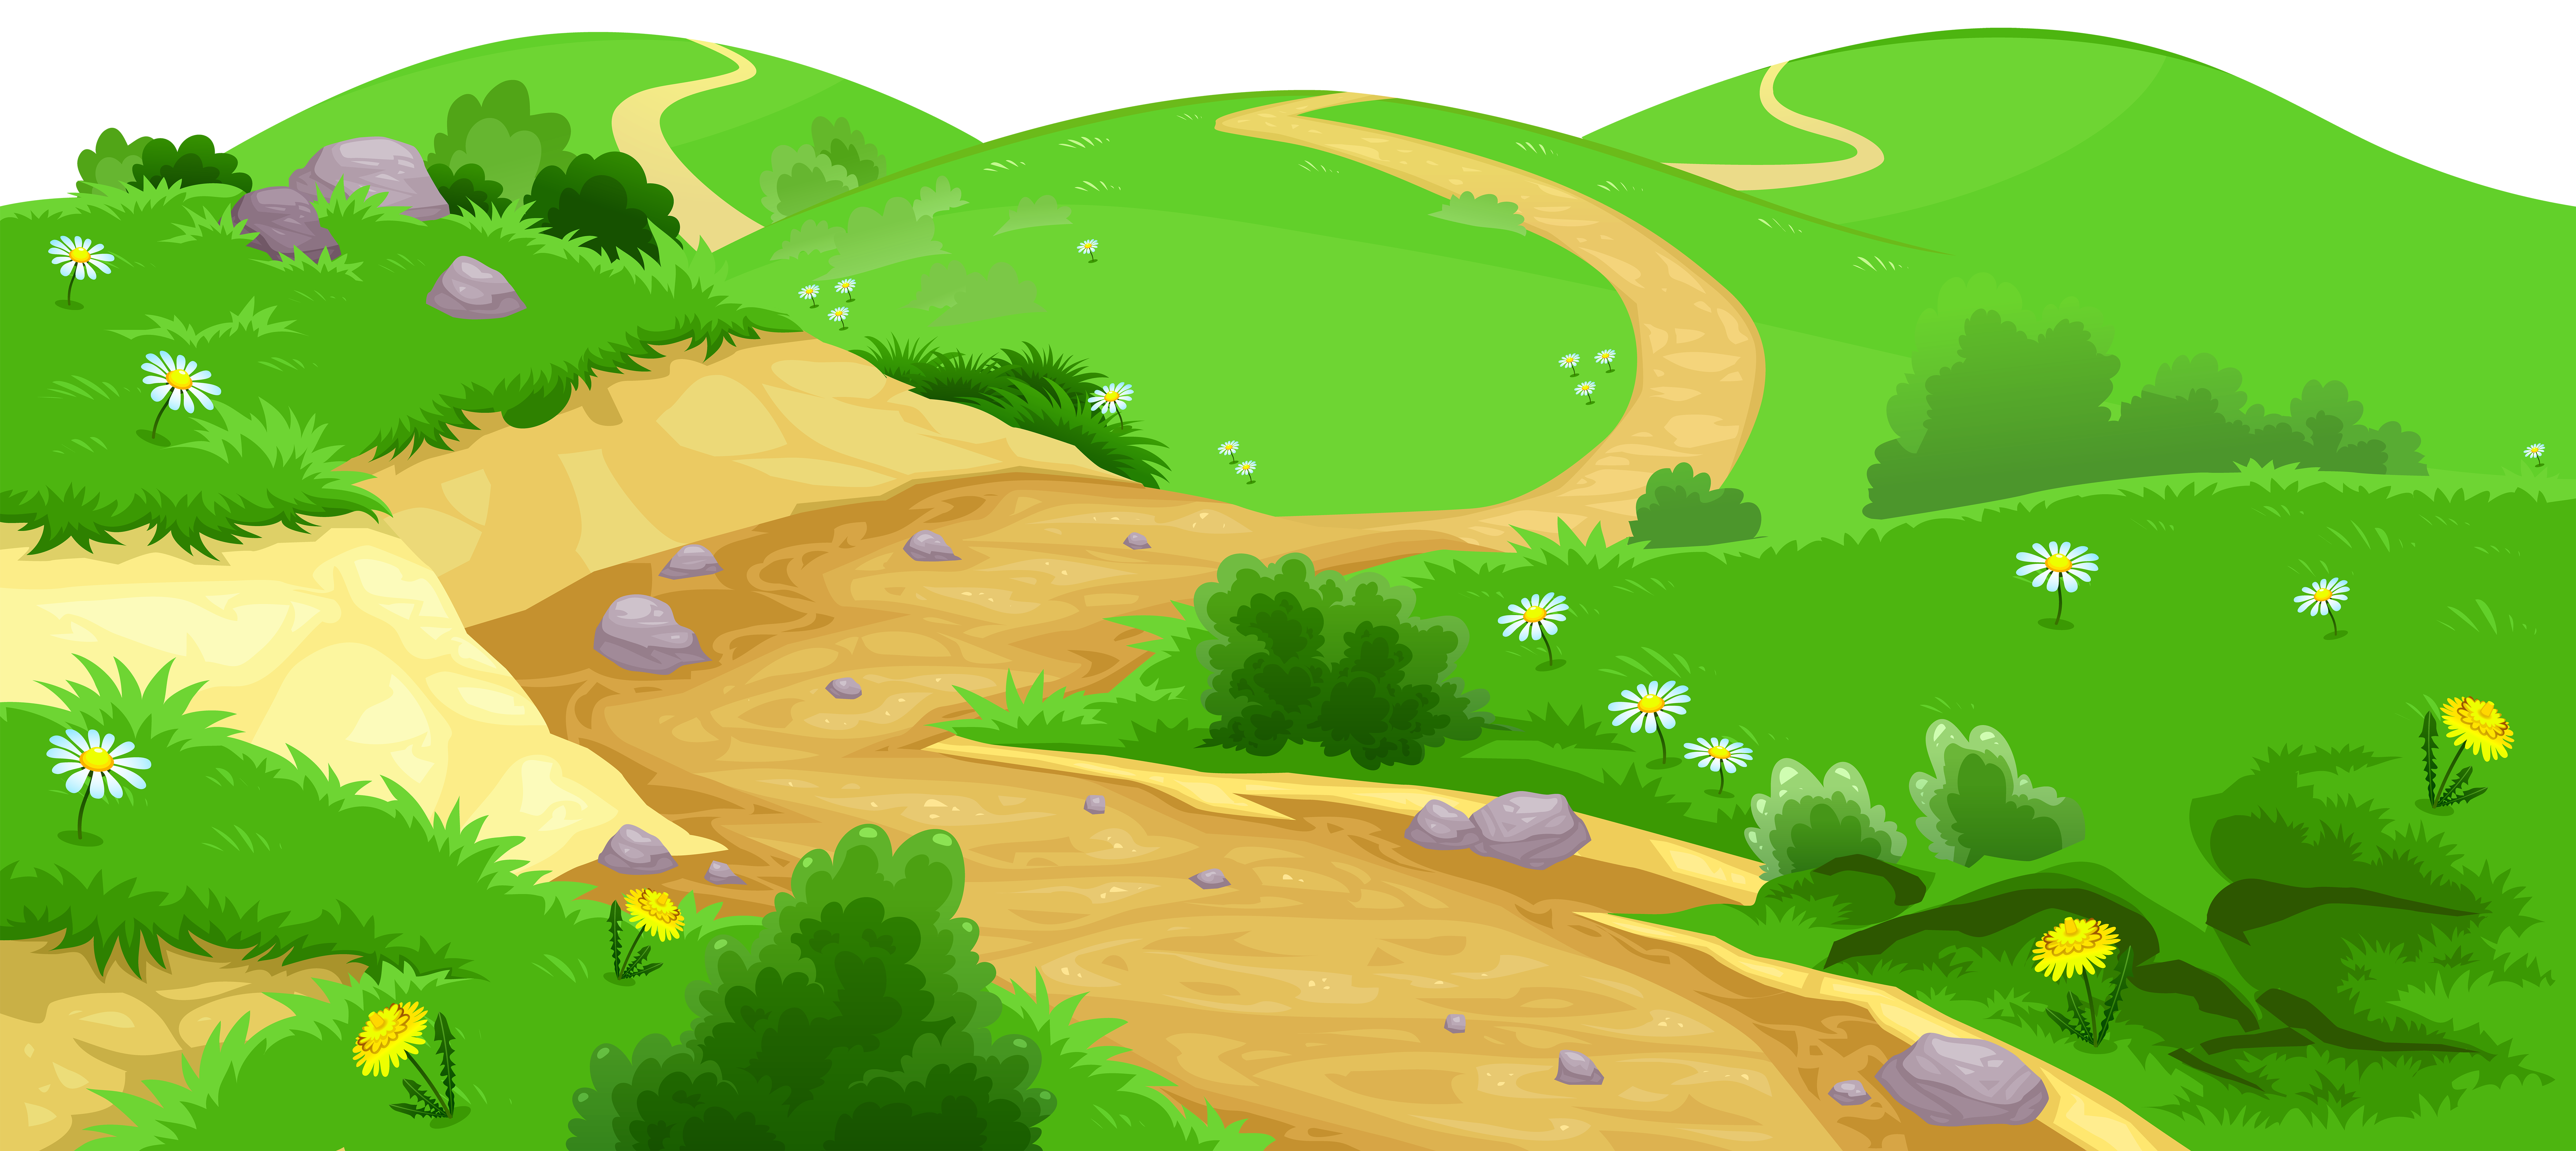 Hill clipart green valley. Ground transparent png image